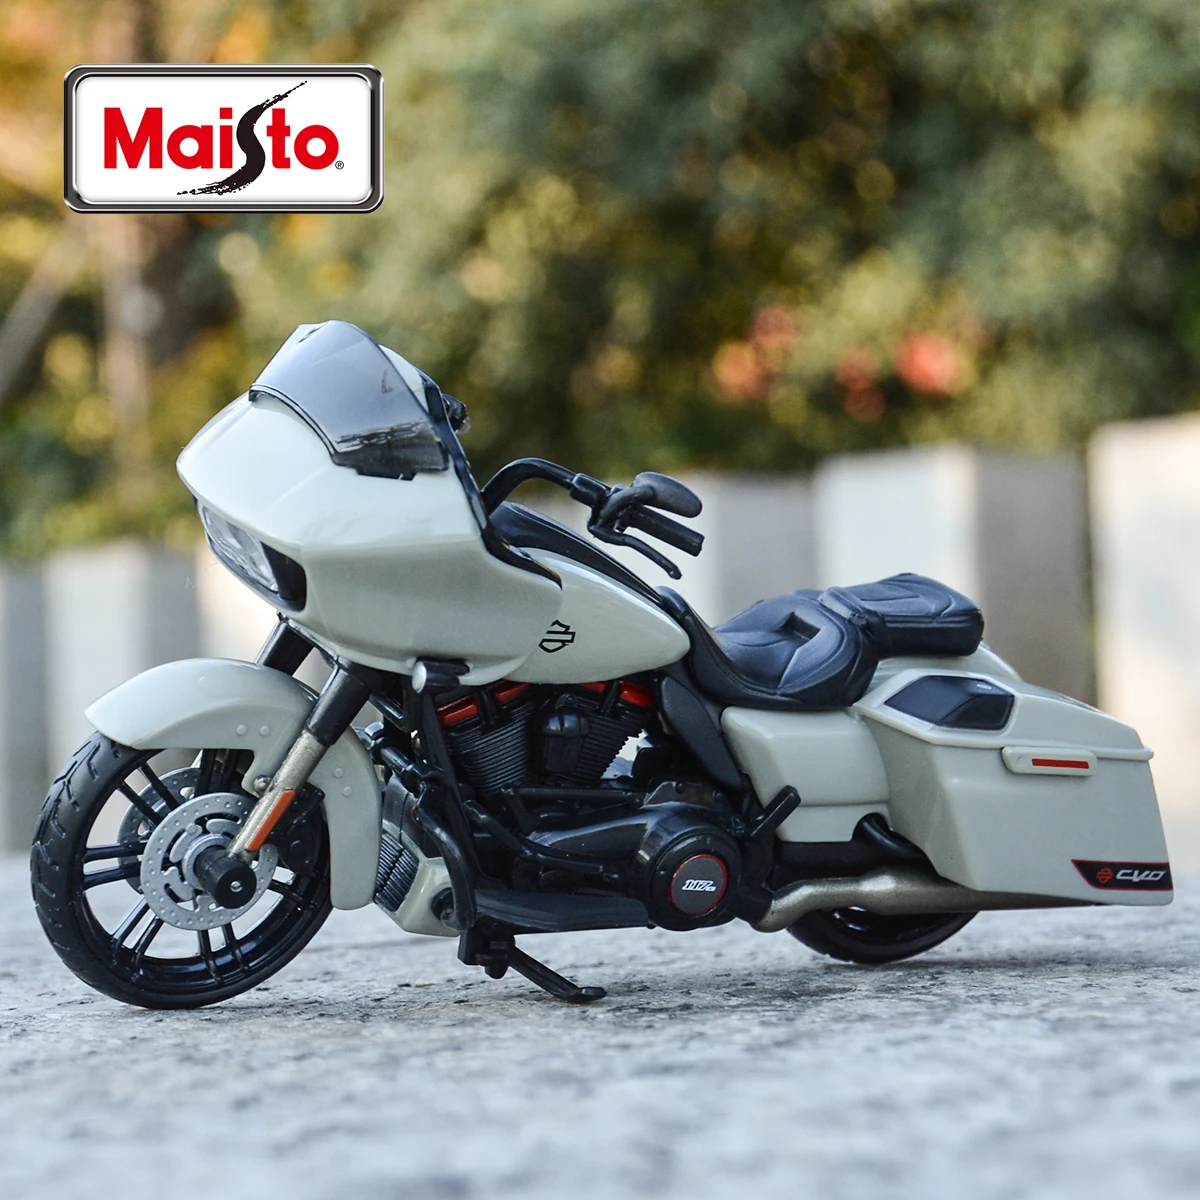 Maisto 1:18 Harley-Davidson 2018 CVO Road Glide Gery White Die Cast Vehicles Collectible Hobbies Motorcycle Model Toys